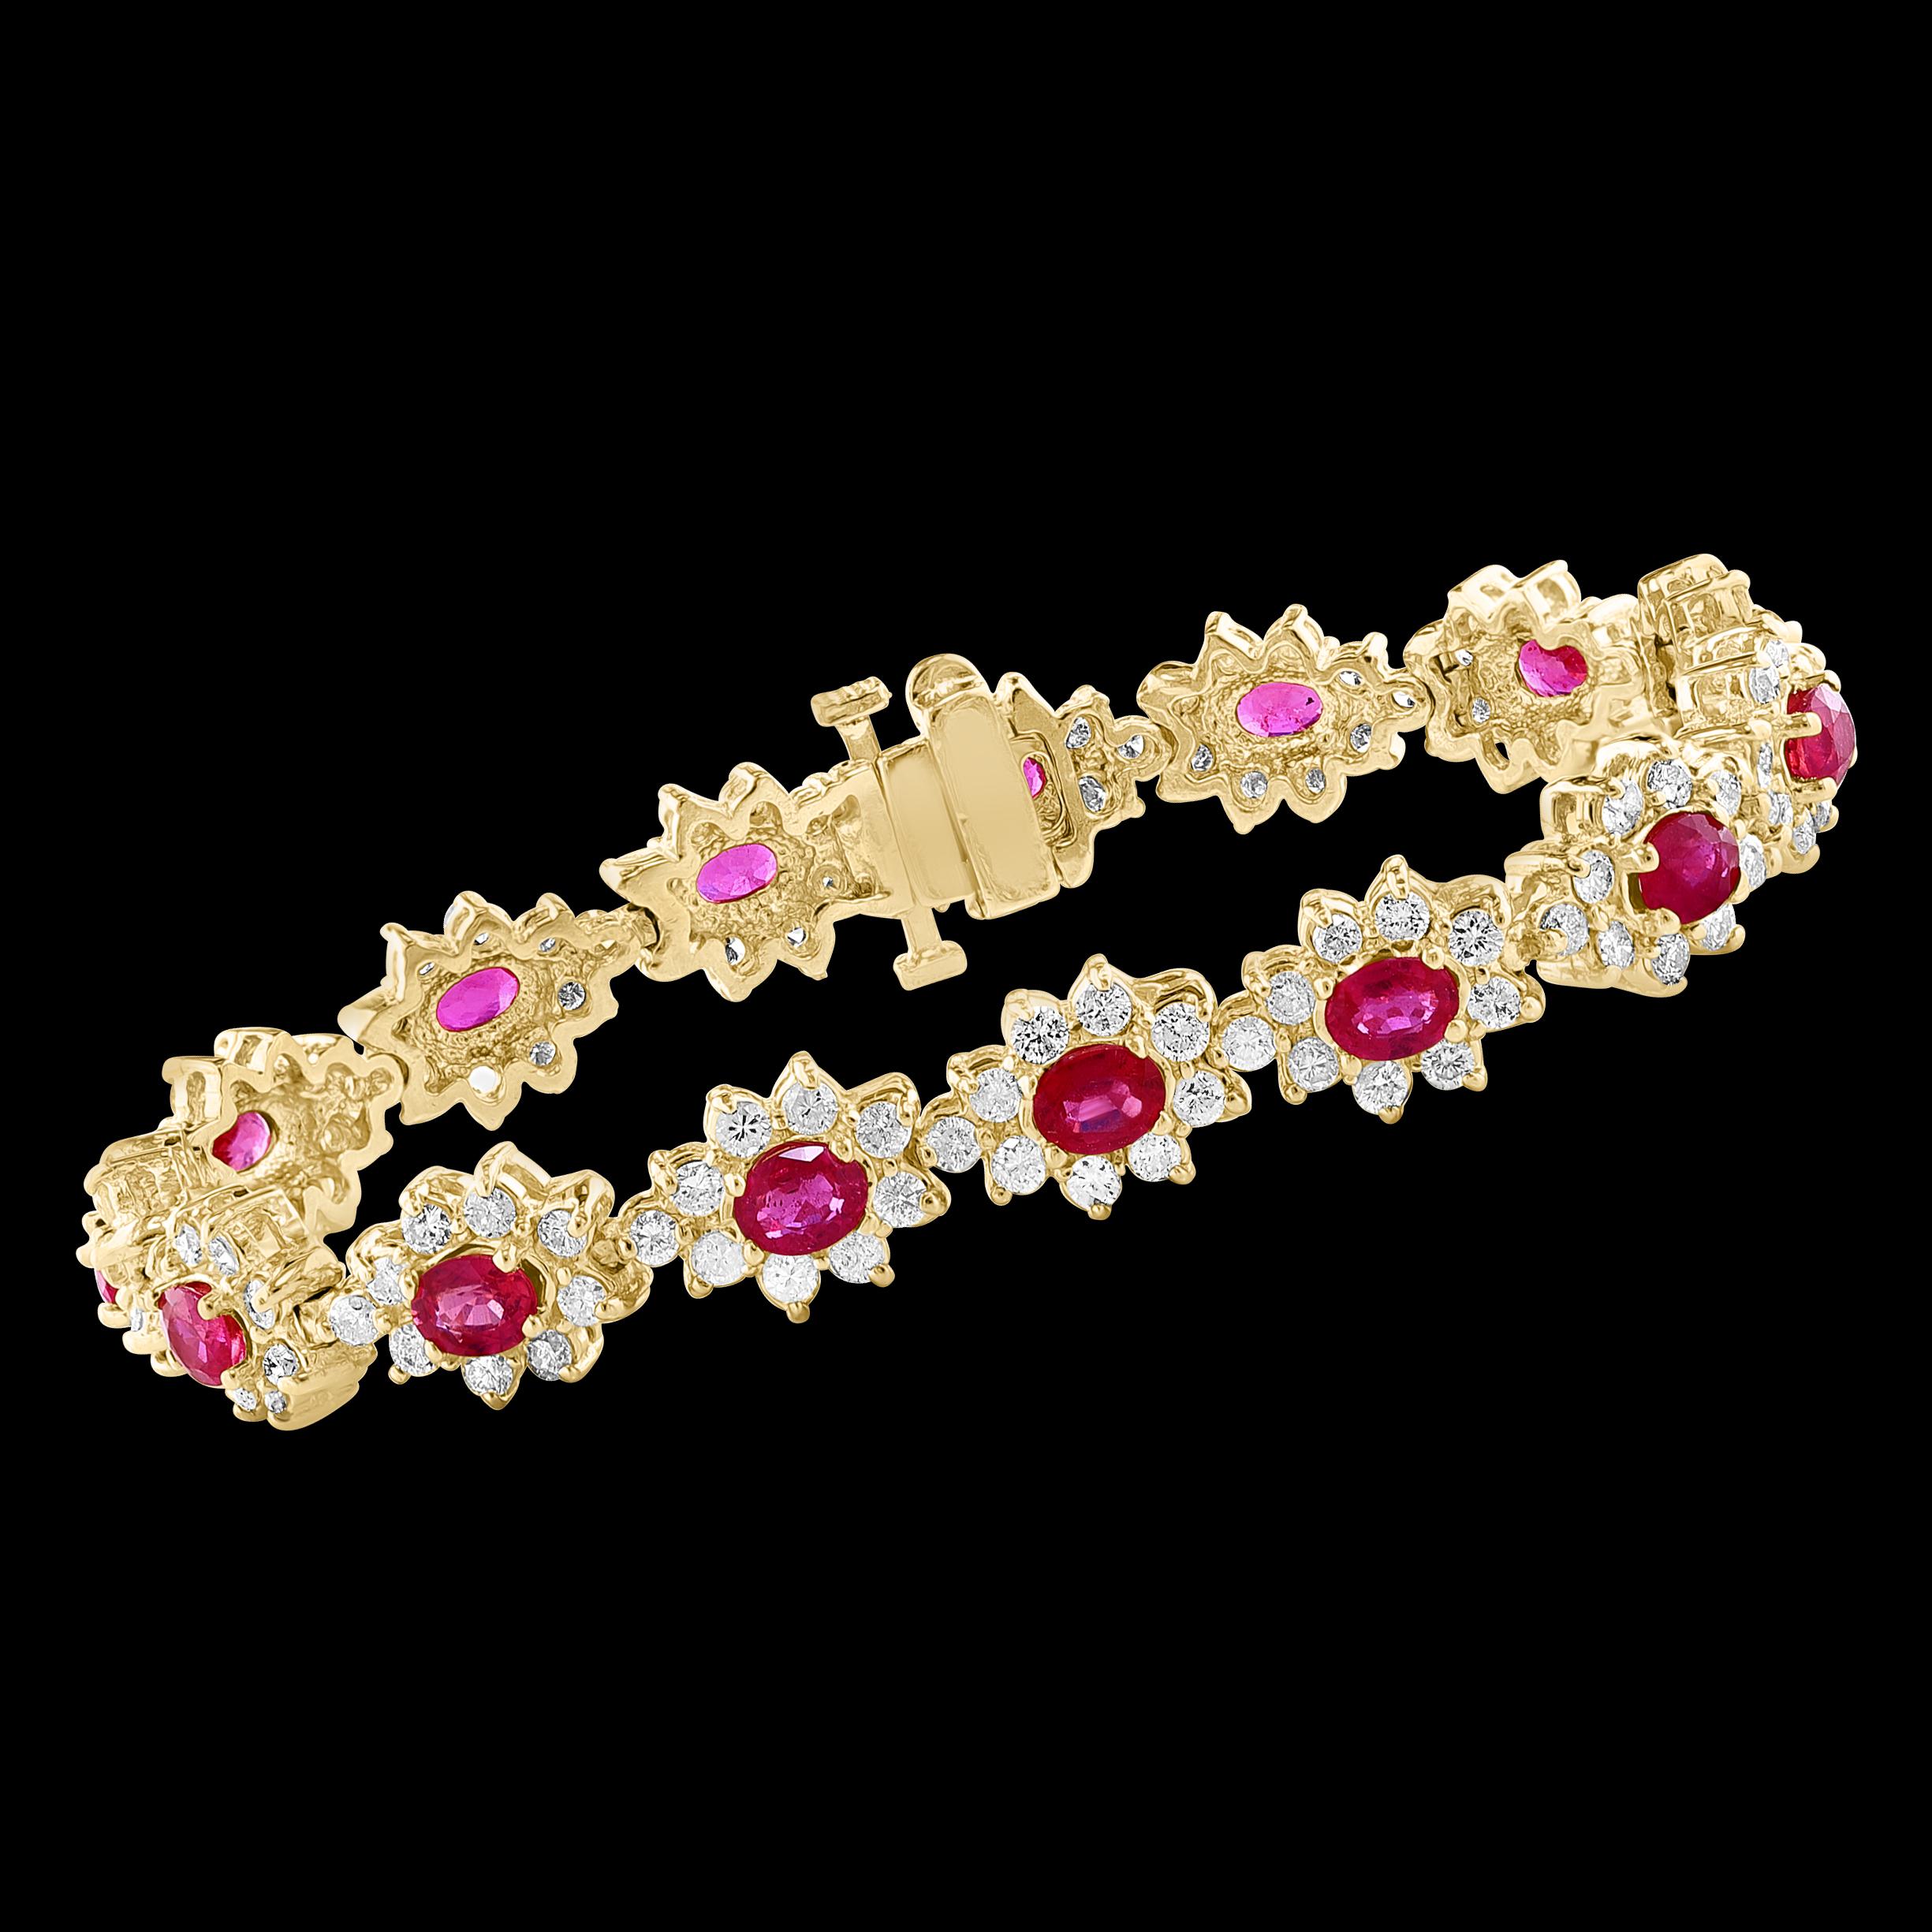 This Tennis bracelet is an affordable piece of jewelry that is sure to catch your eye. It features 15 stones of Oval cut shape natural Rubies that are of exceptionally good quality and color, with a beautiful color that is sure to impress. Each ruby